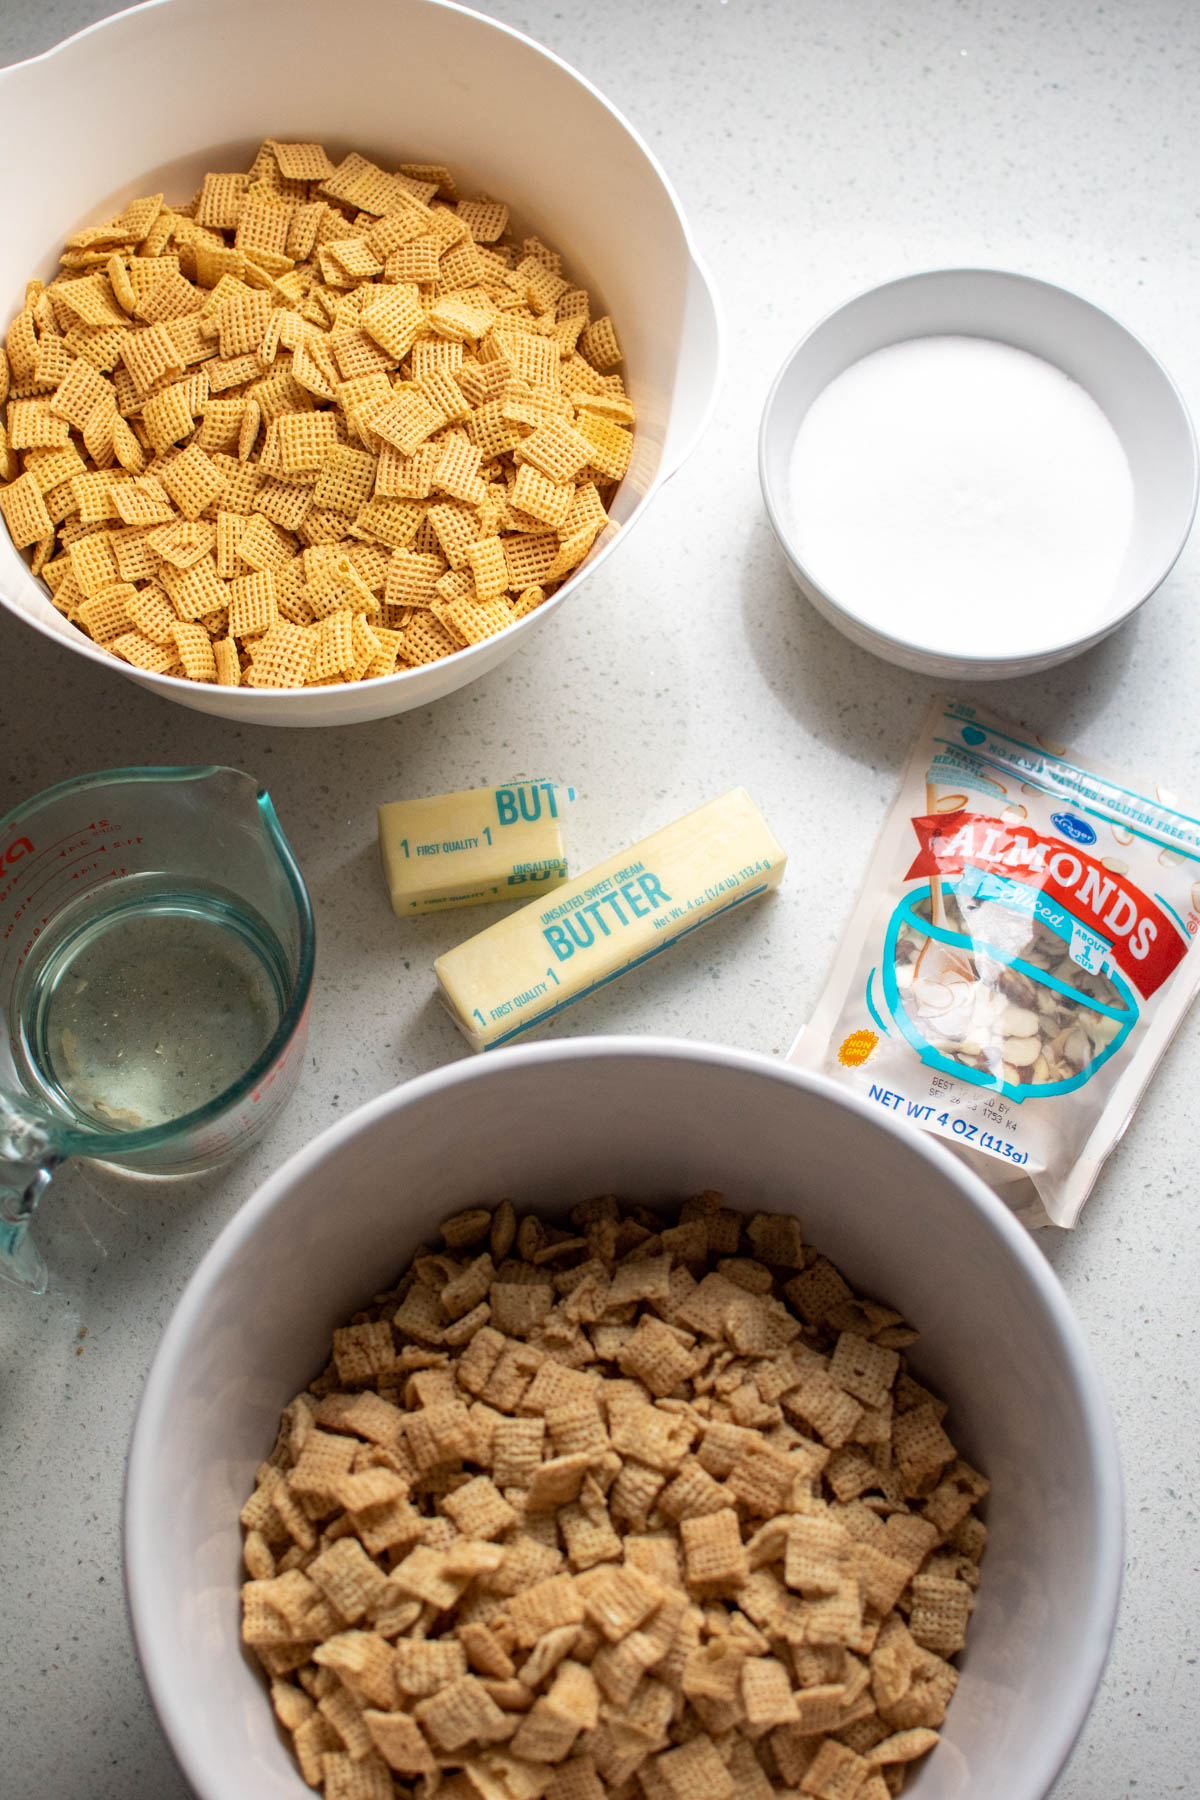 Sticky Chex mix ingredients on counter including butter, sugar, and almonds.